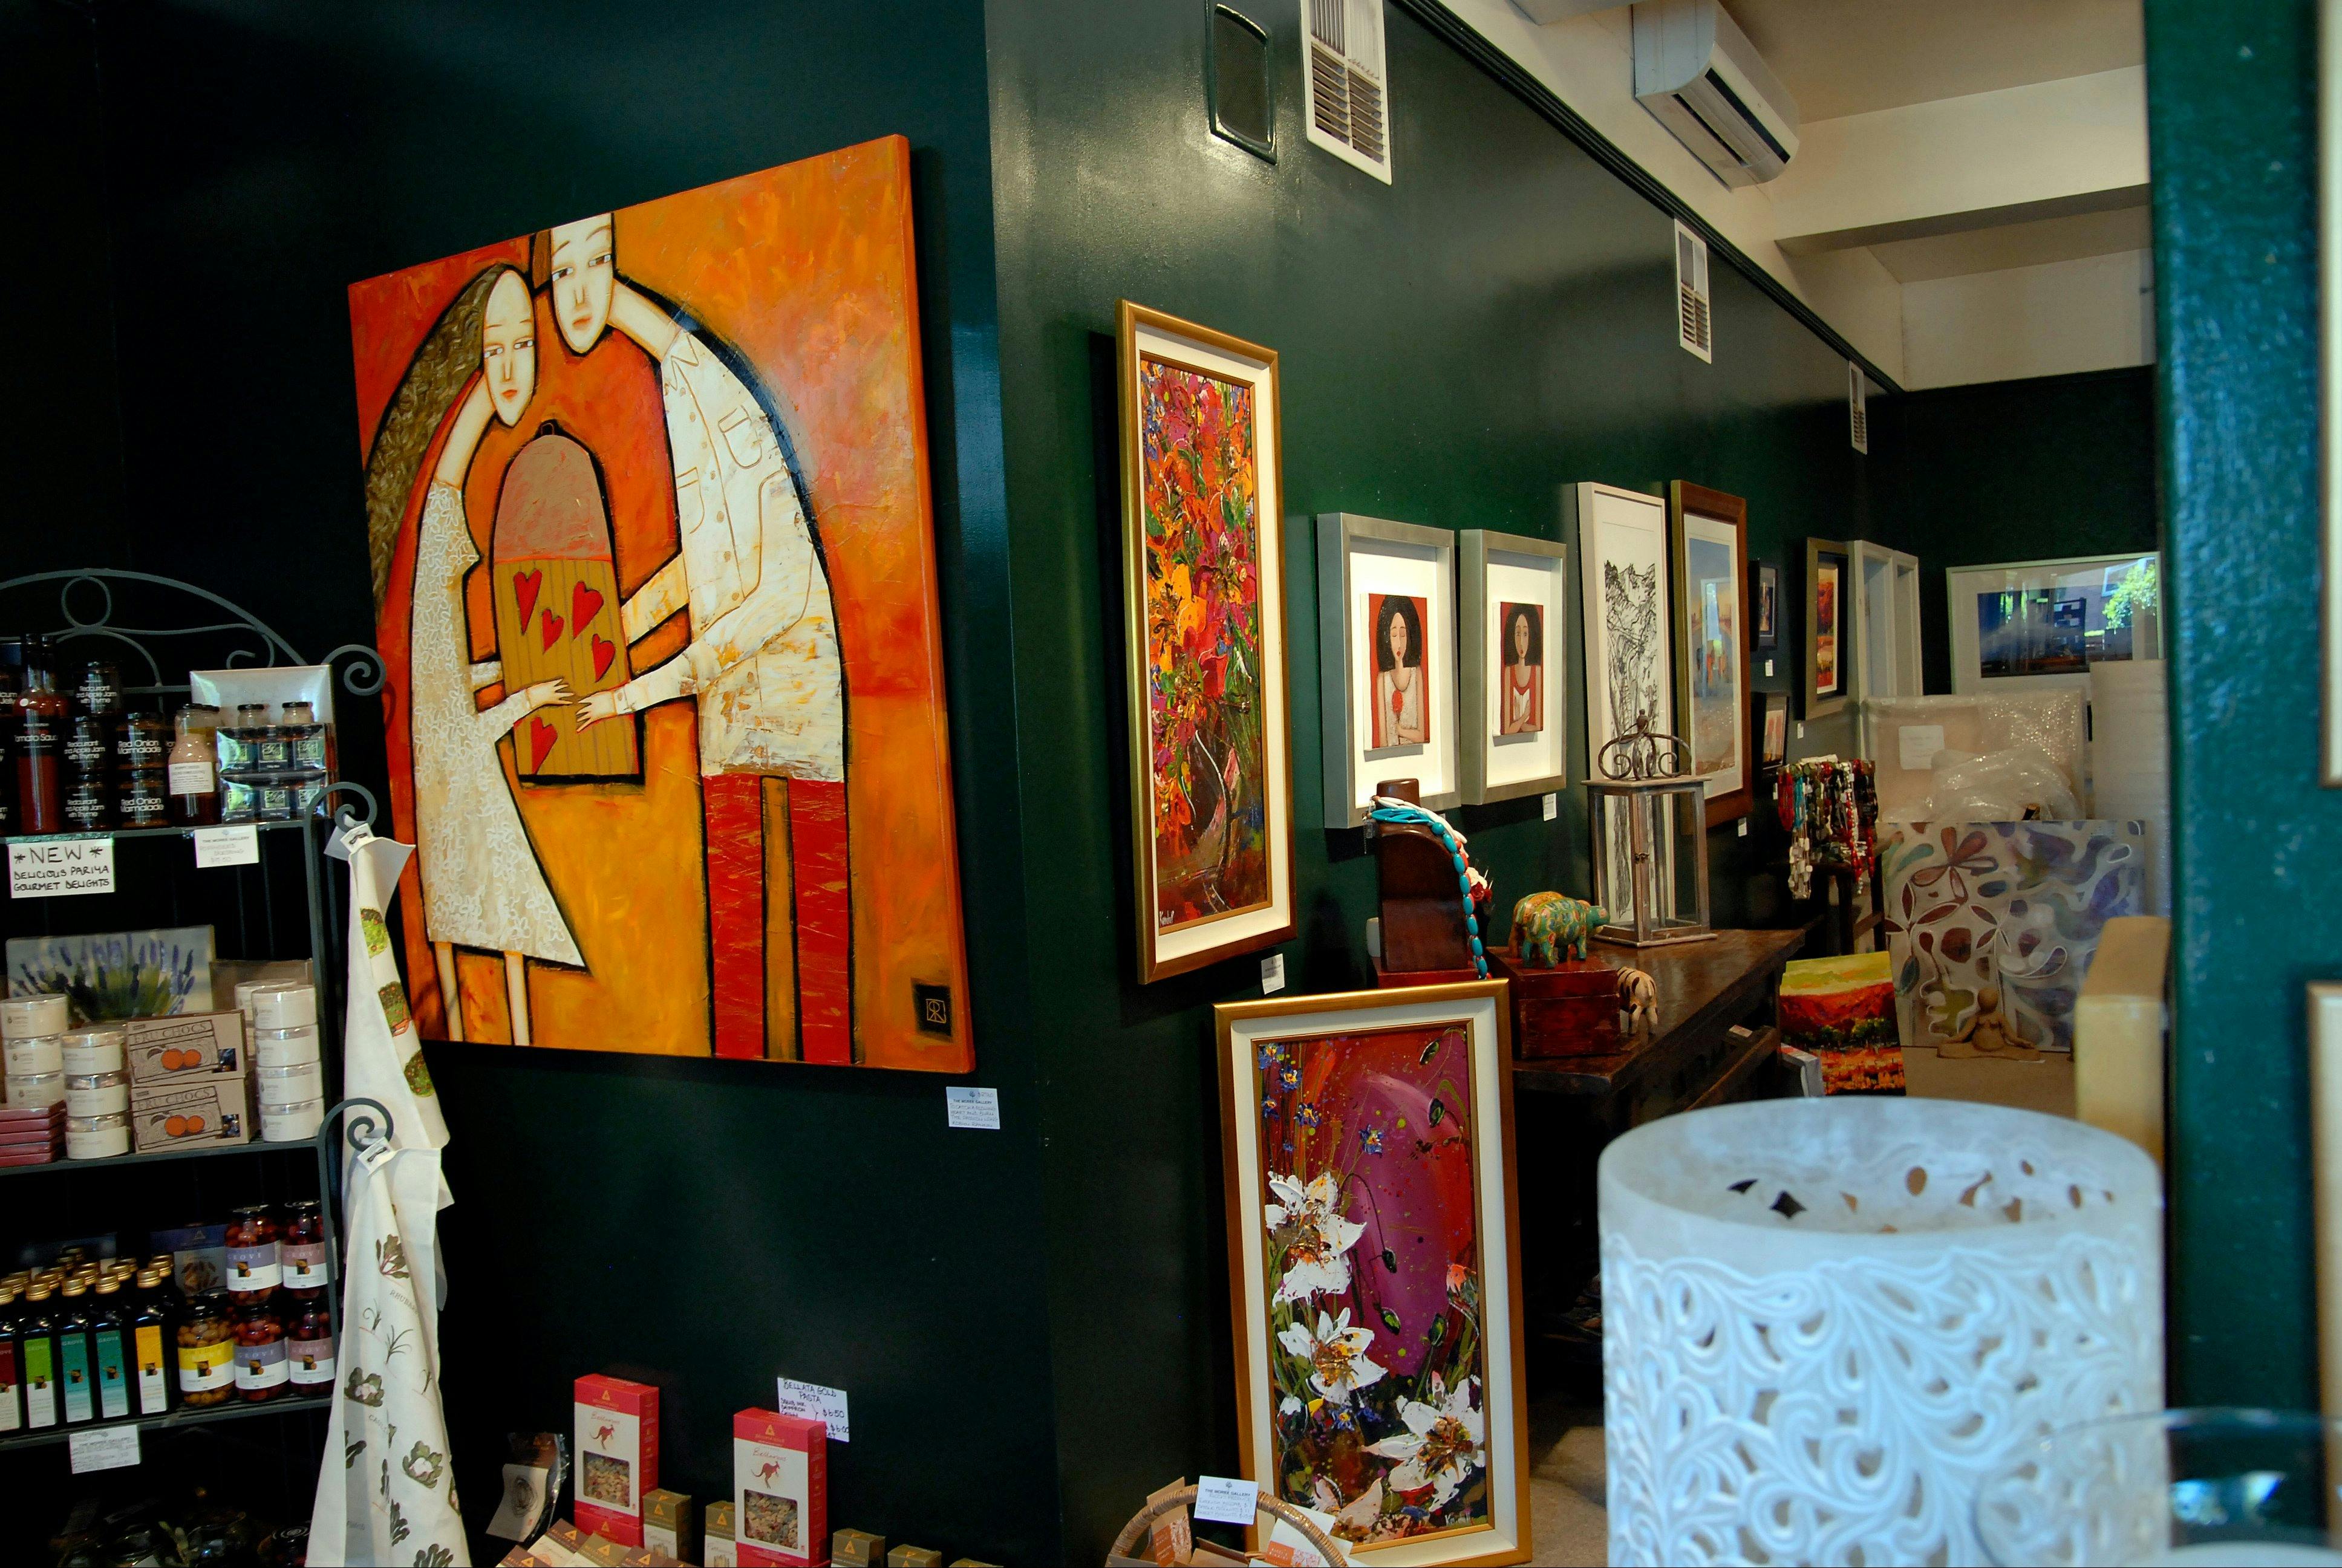 The Moree Gallery